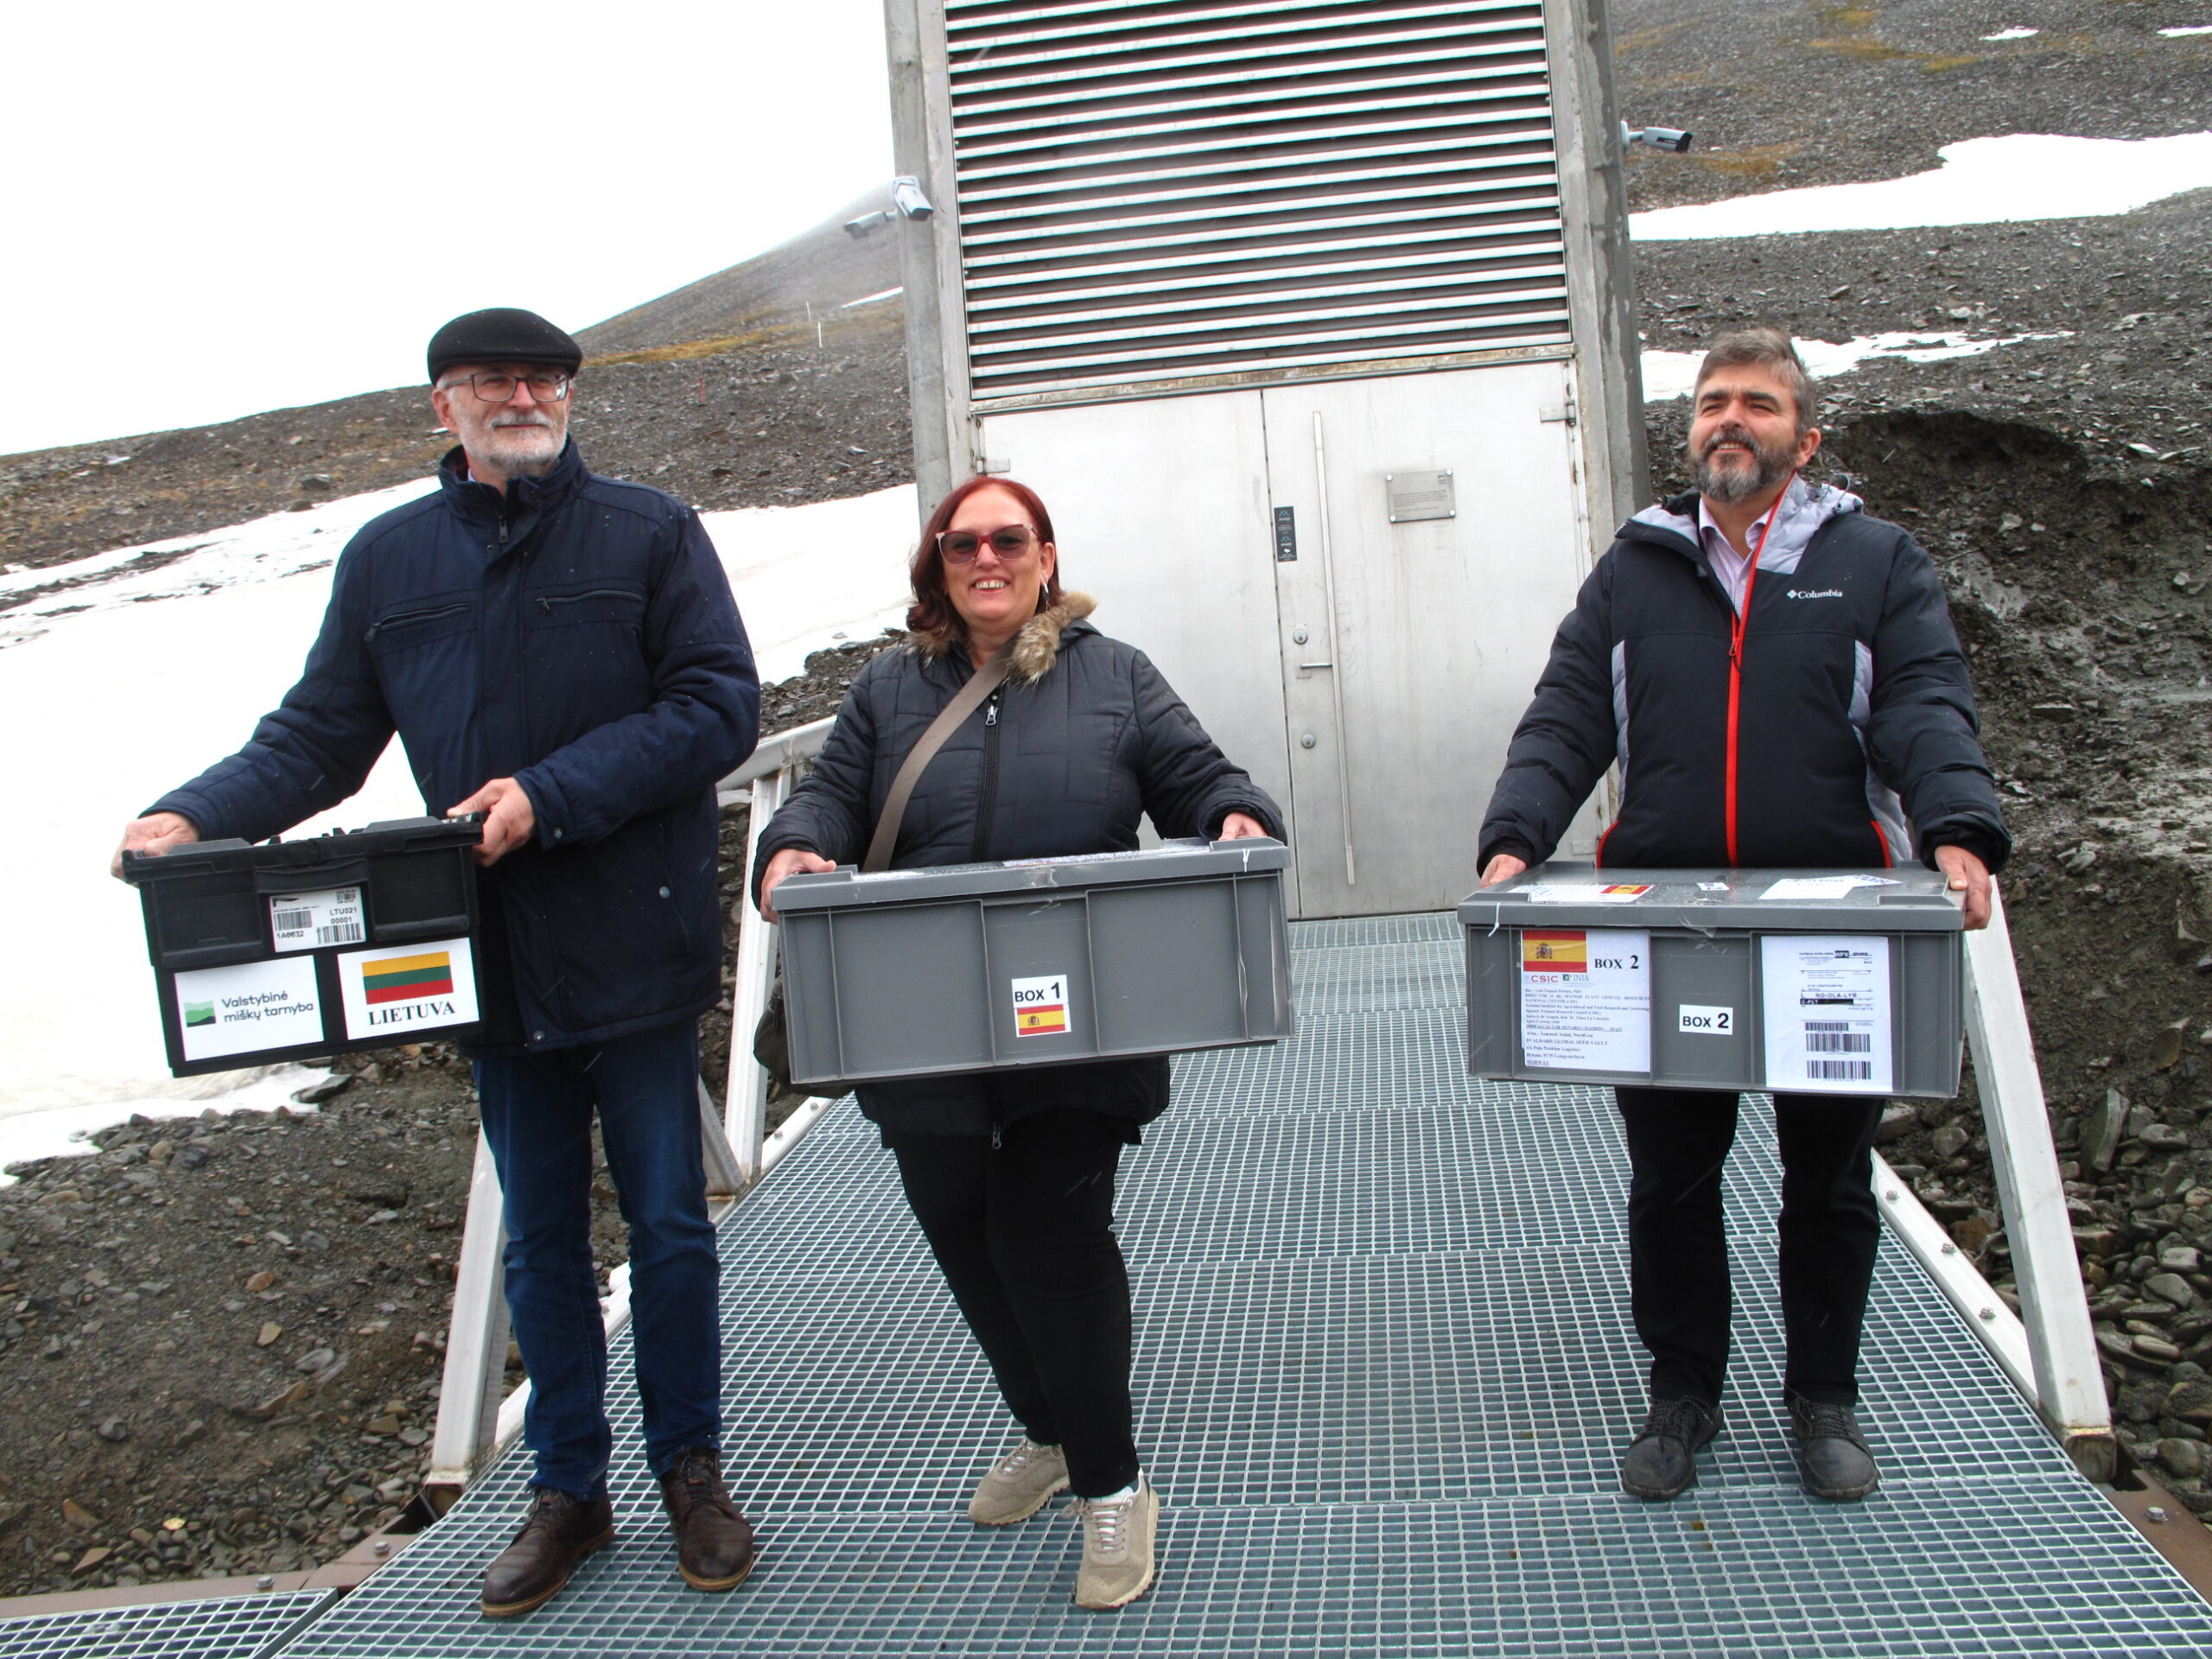 Bronislovas Gelvonauskis from State Forest Service, Angeles Gomez Borrego and Luis Guasch Pereira from the Spanish genebank at CSIC bringing their first seed boxes at the Seed Vault.